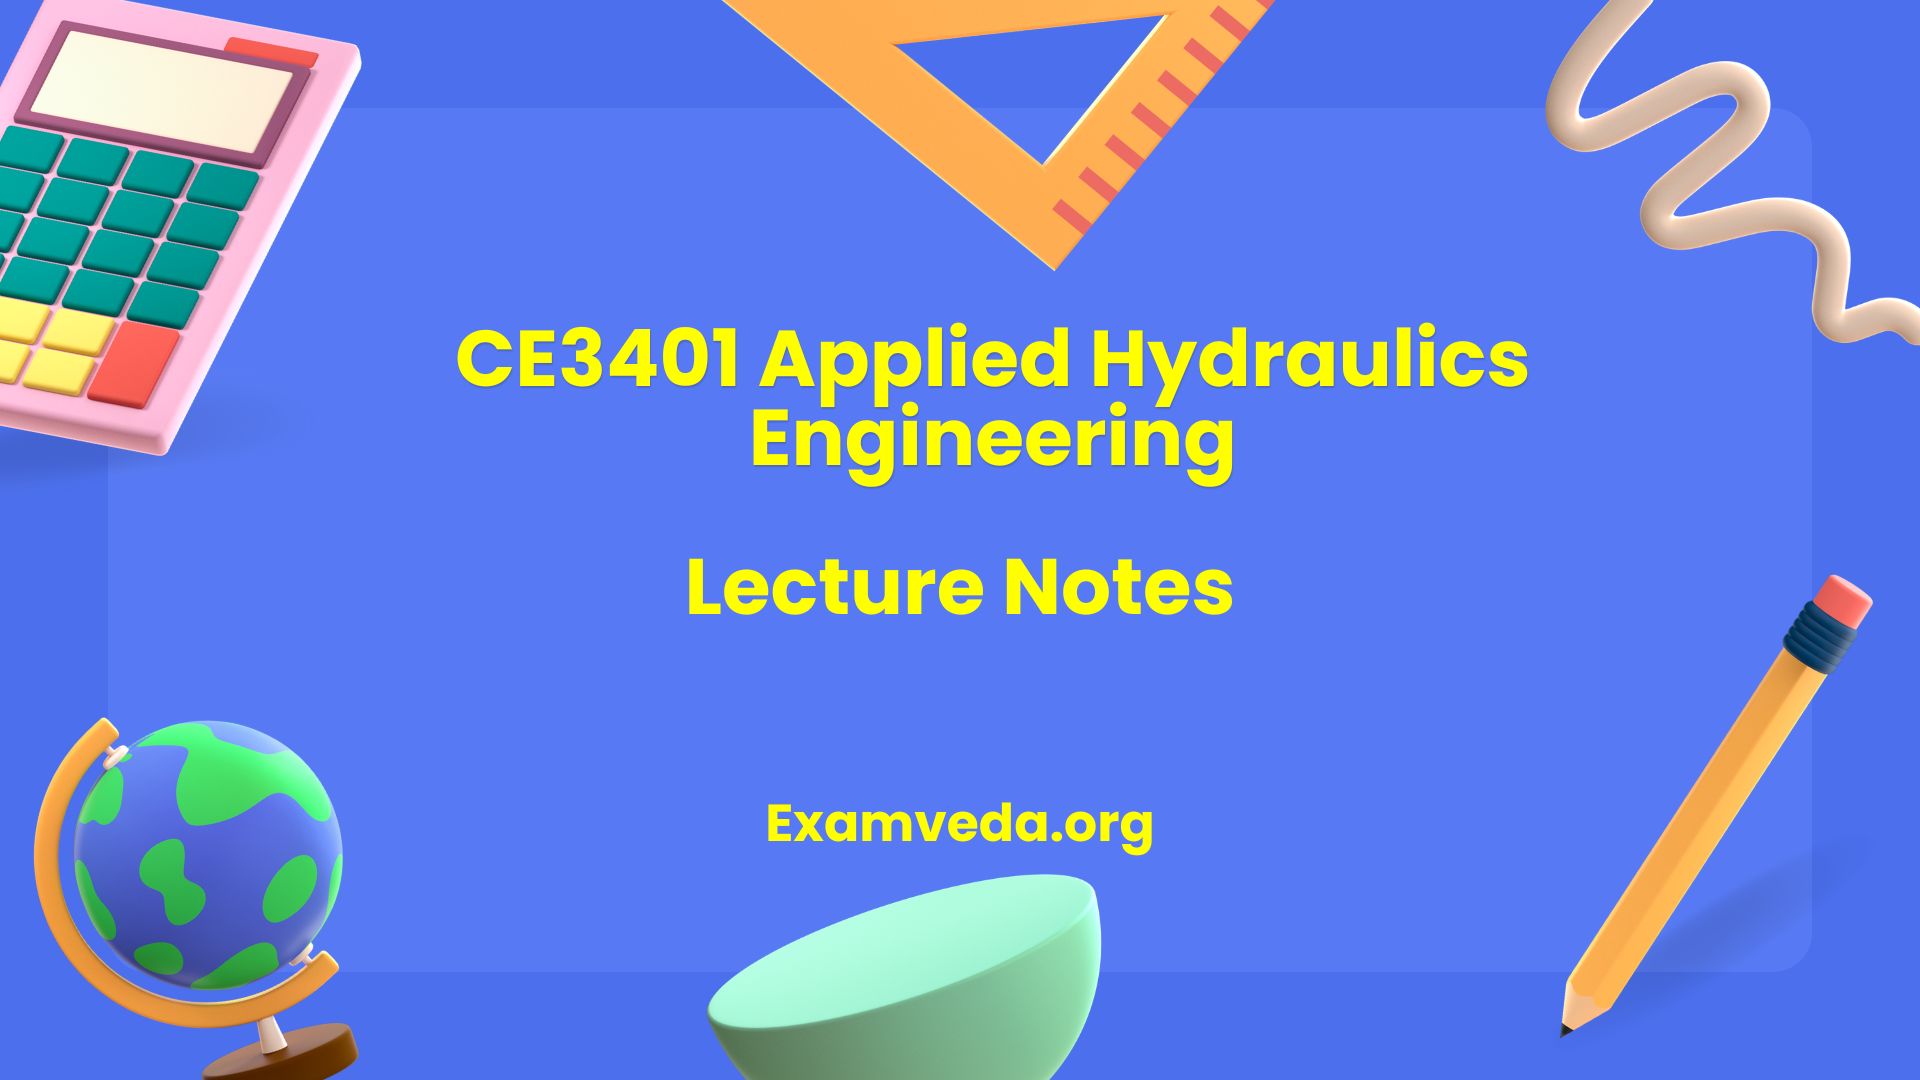 CE3401 Applied Hydraulics Engineering Lecture Notes